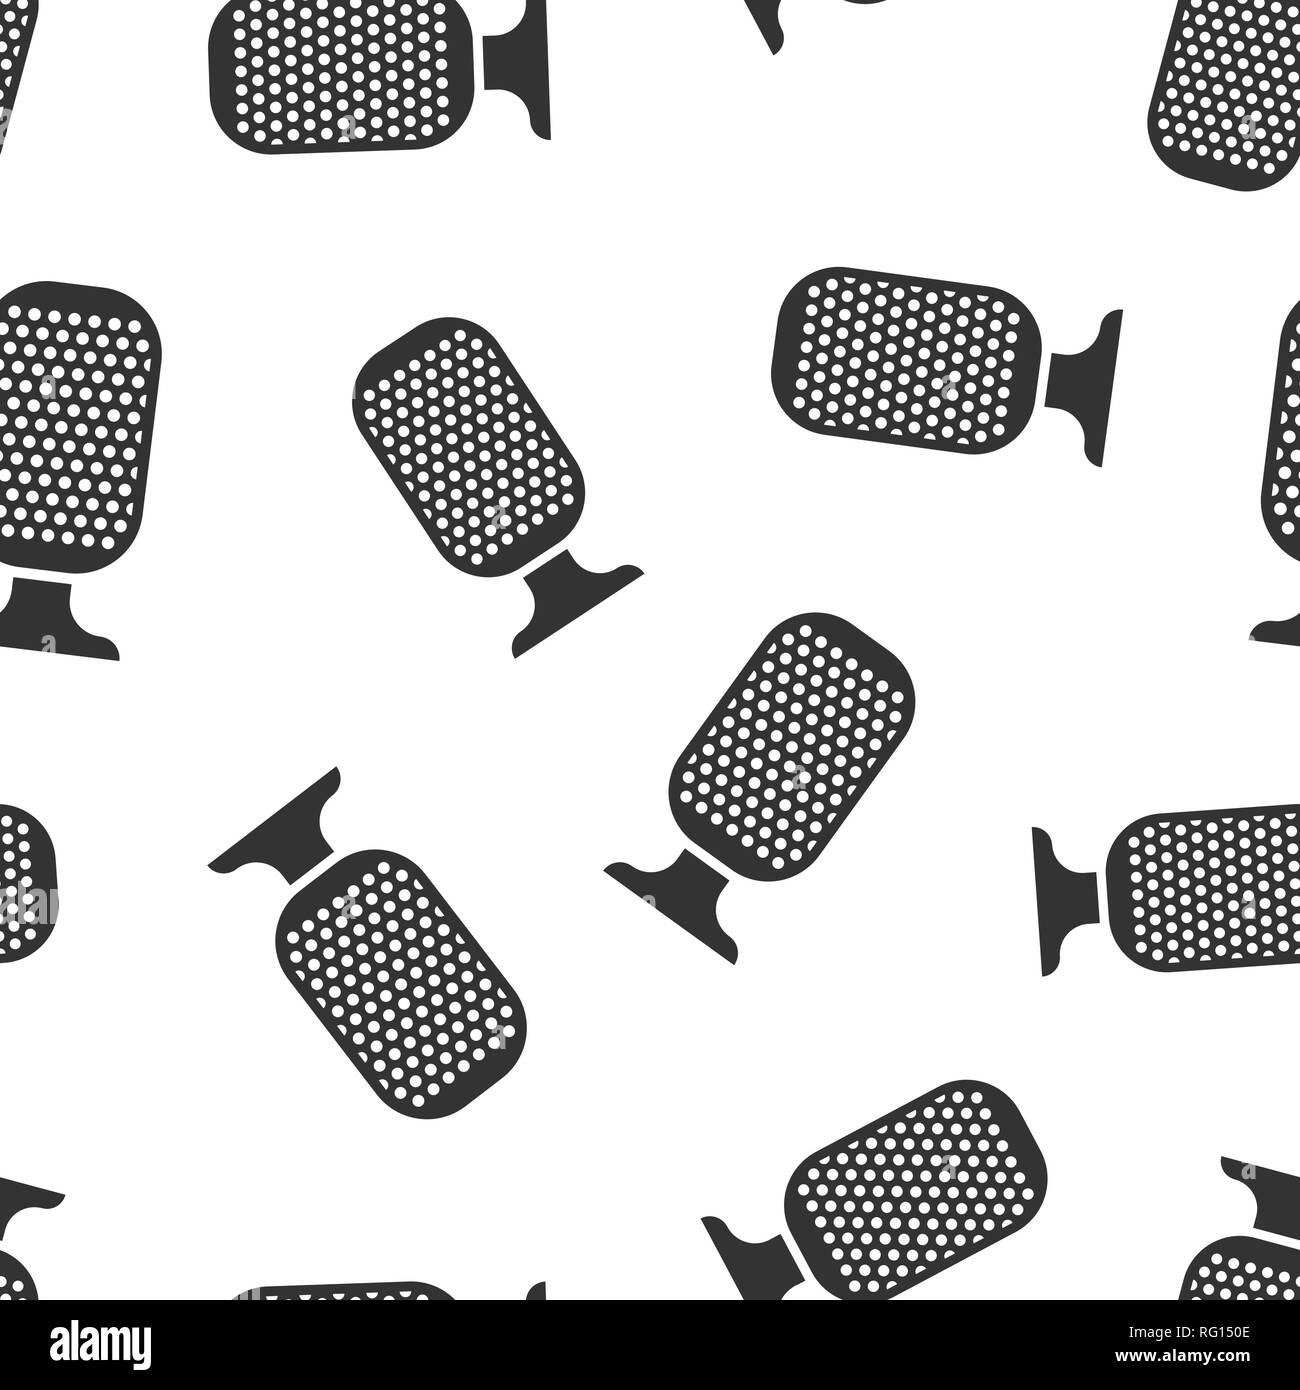 Microphone icon seamless pattern background. Mic broadcast vector illustration. Mike speech symbol pattern. Stock Vector